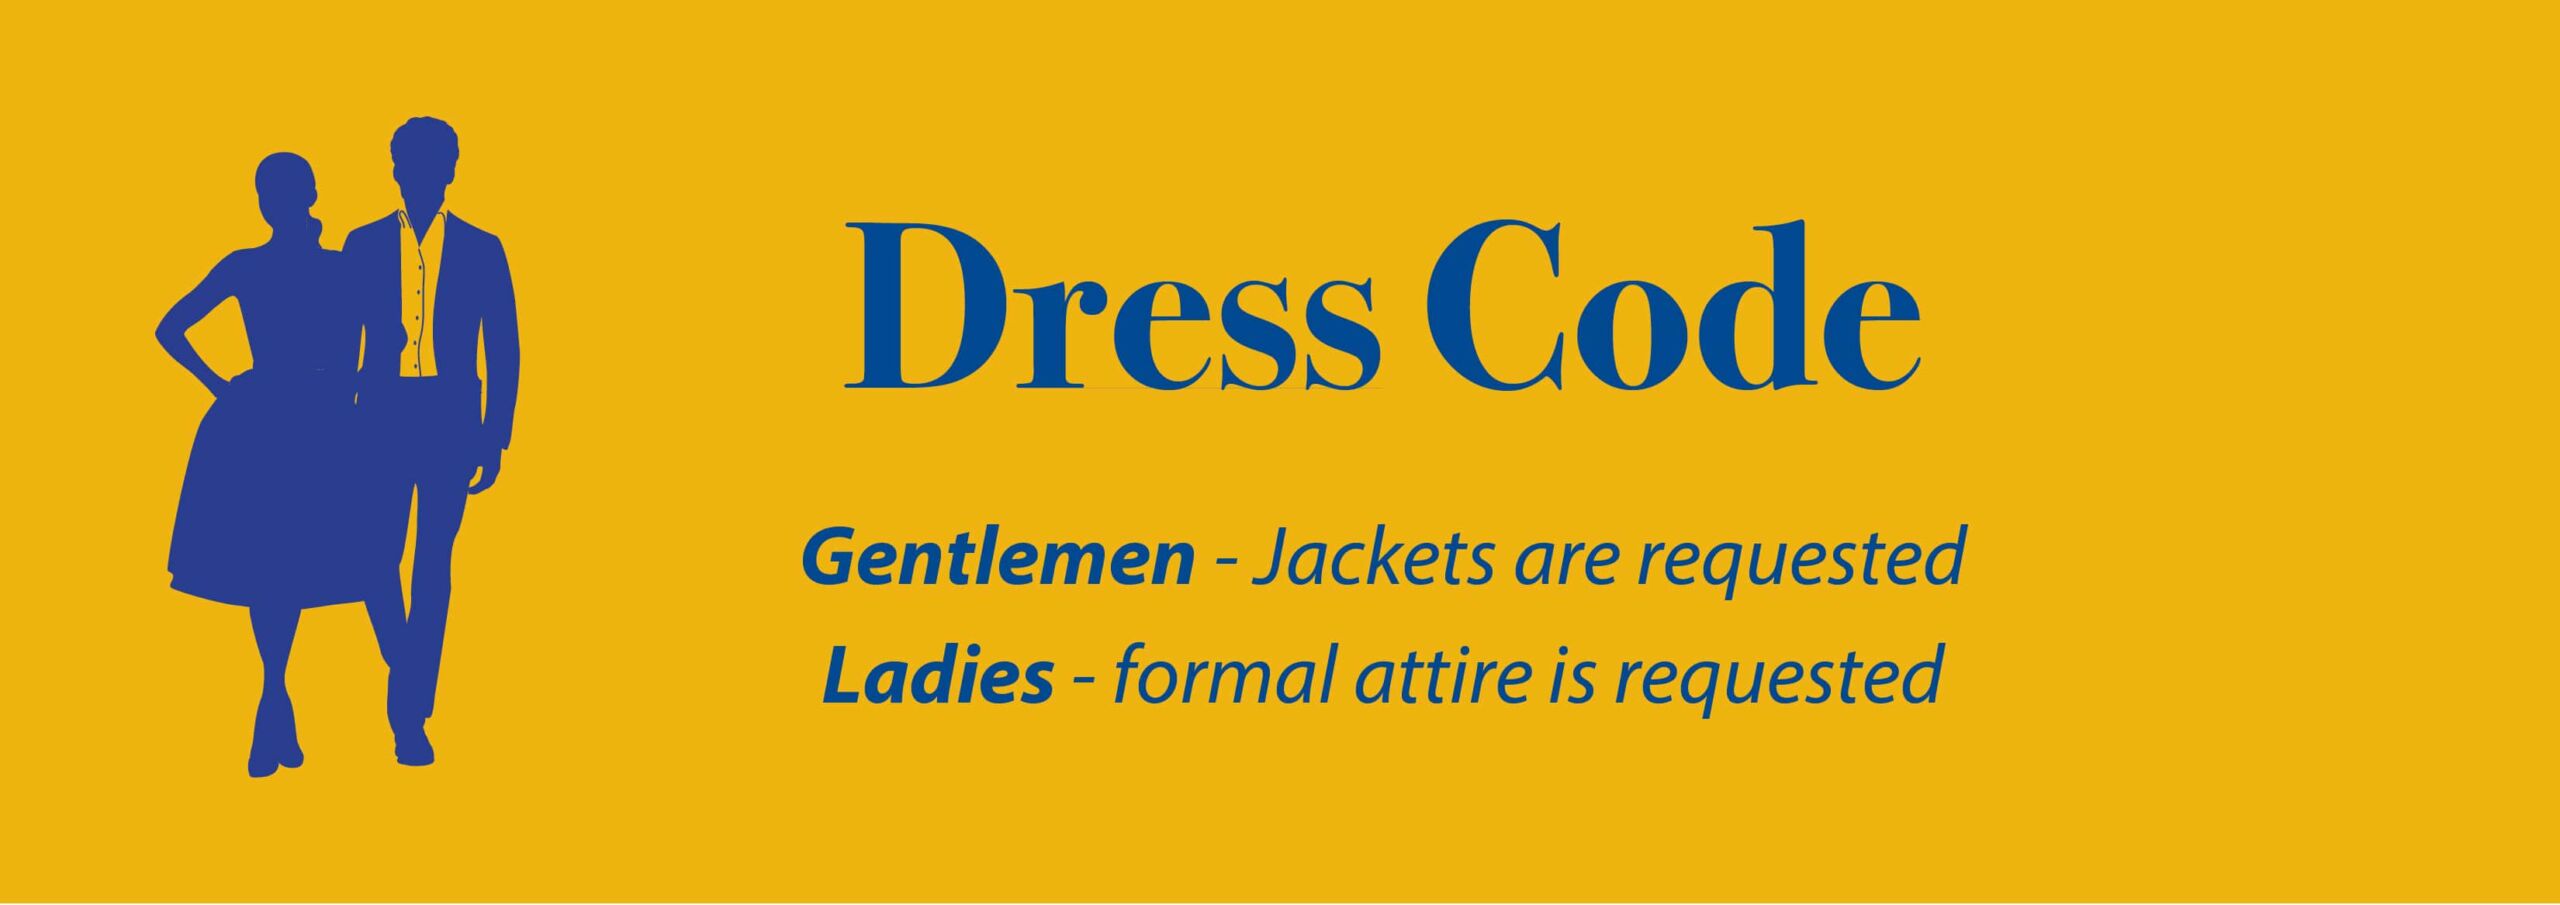 Dress Code: Gentleman - Jackets are requested. Ladies - formal attire is requested.